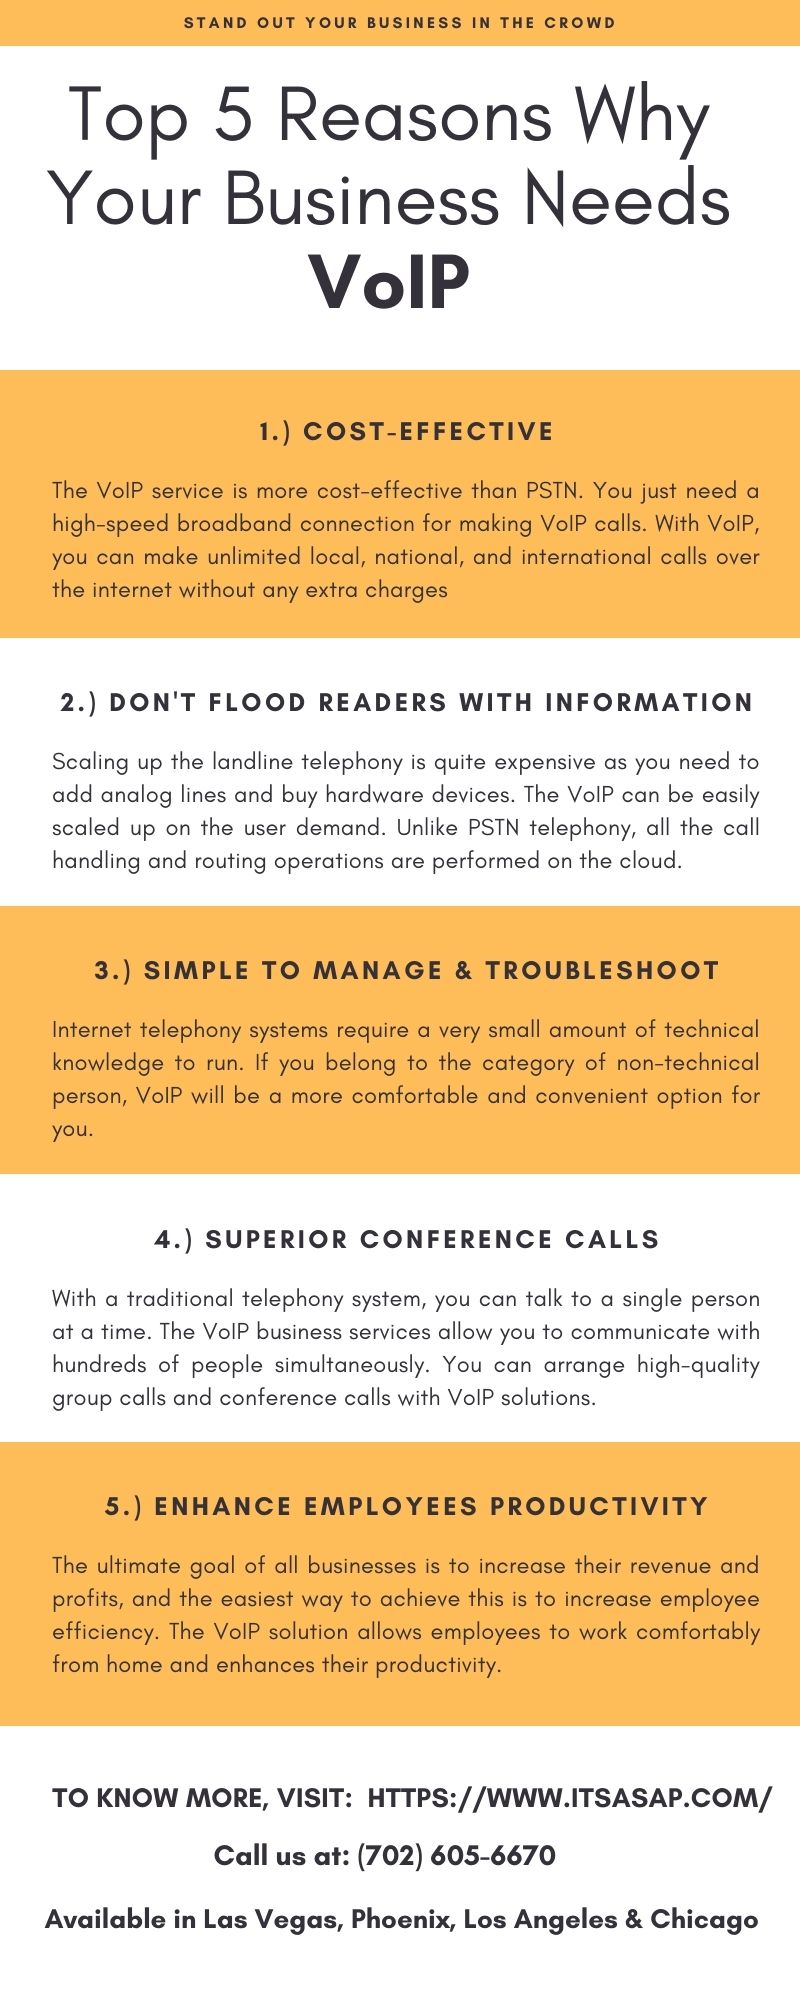 Top 5 Reasons Why Your Business Needs VoIP